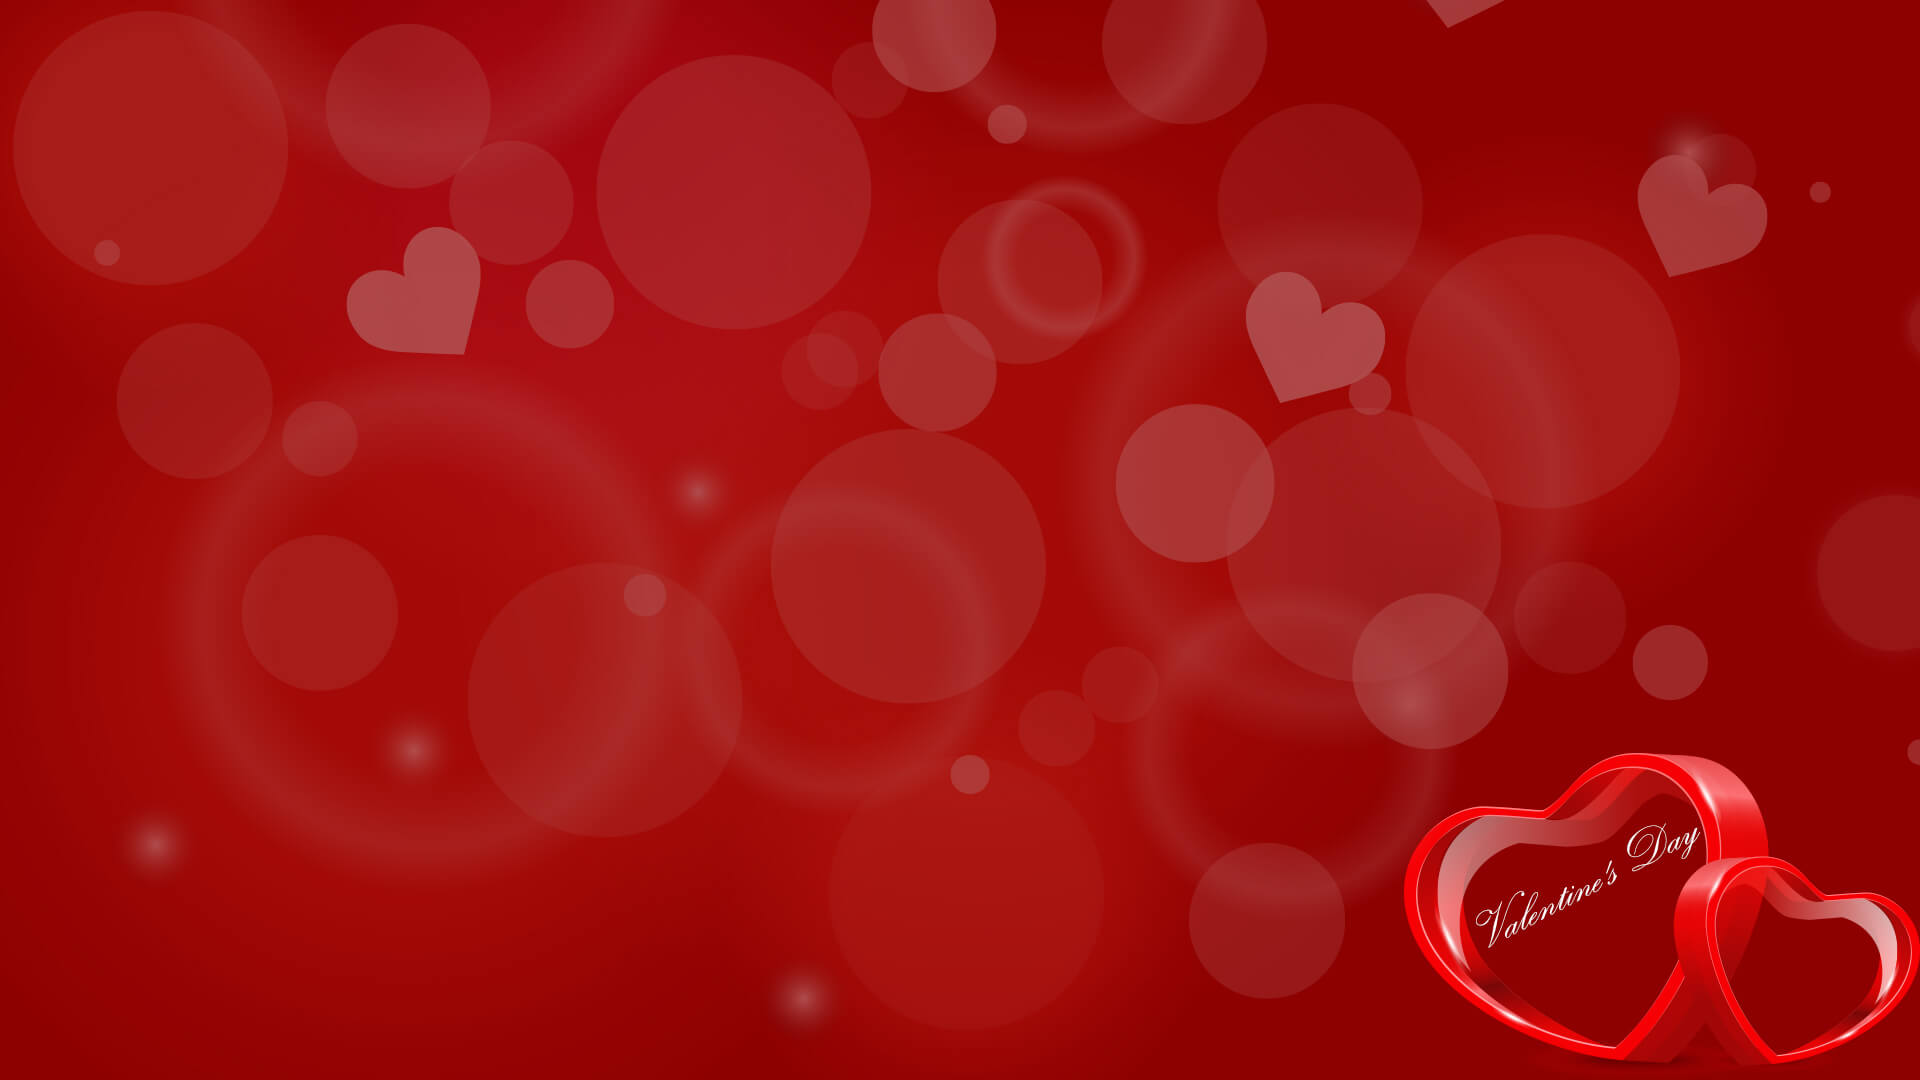 Valentines Day Heart Backgrounds For Powerpoint – Love Ppt In Valentine Powerpoint Templates Free